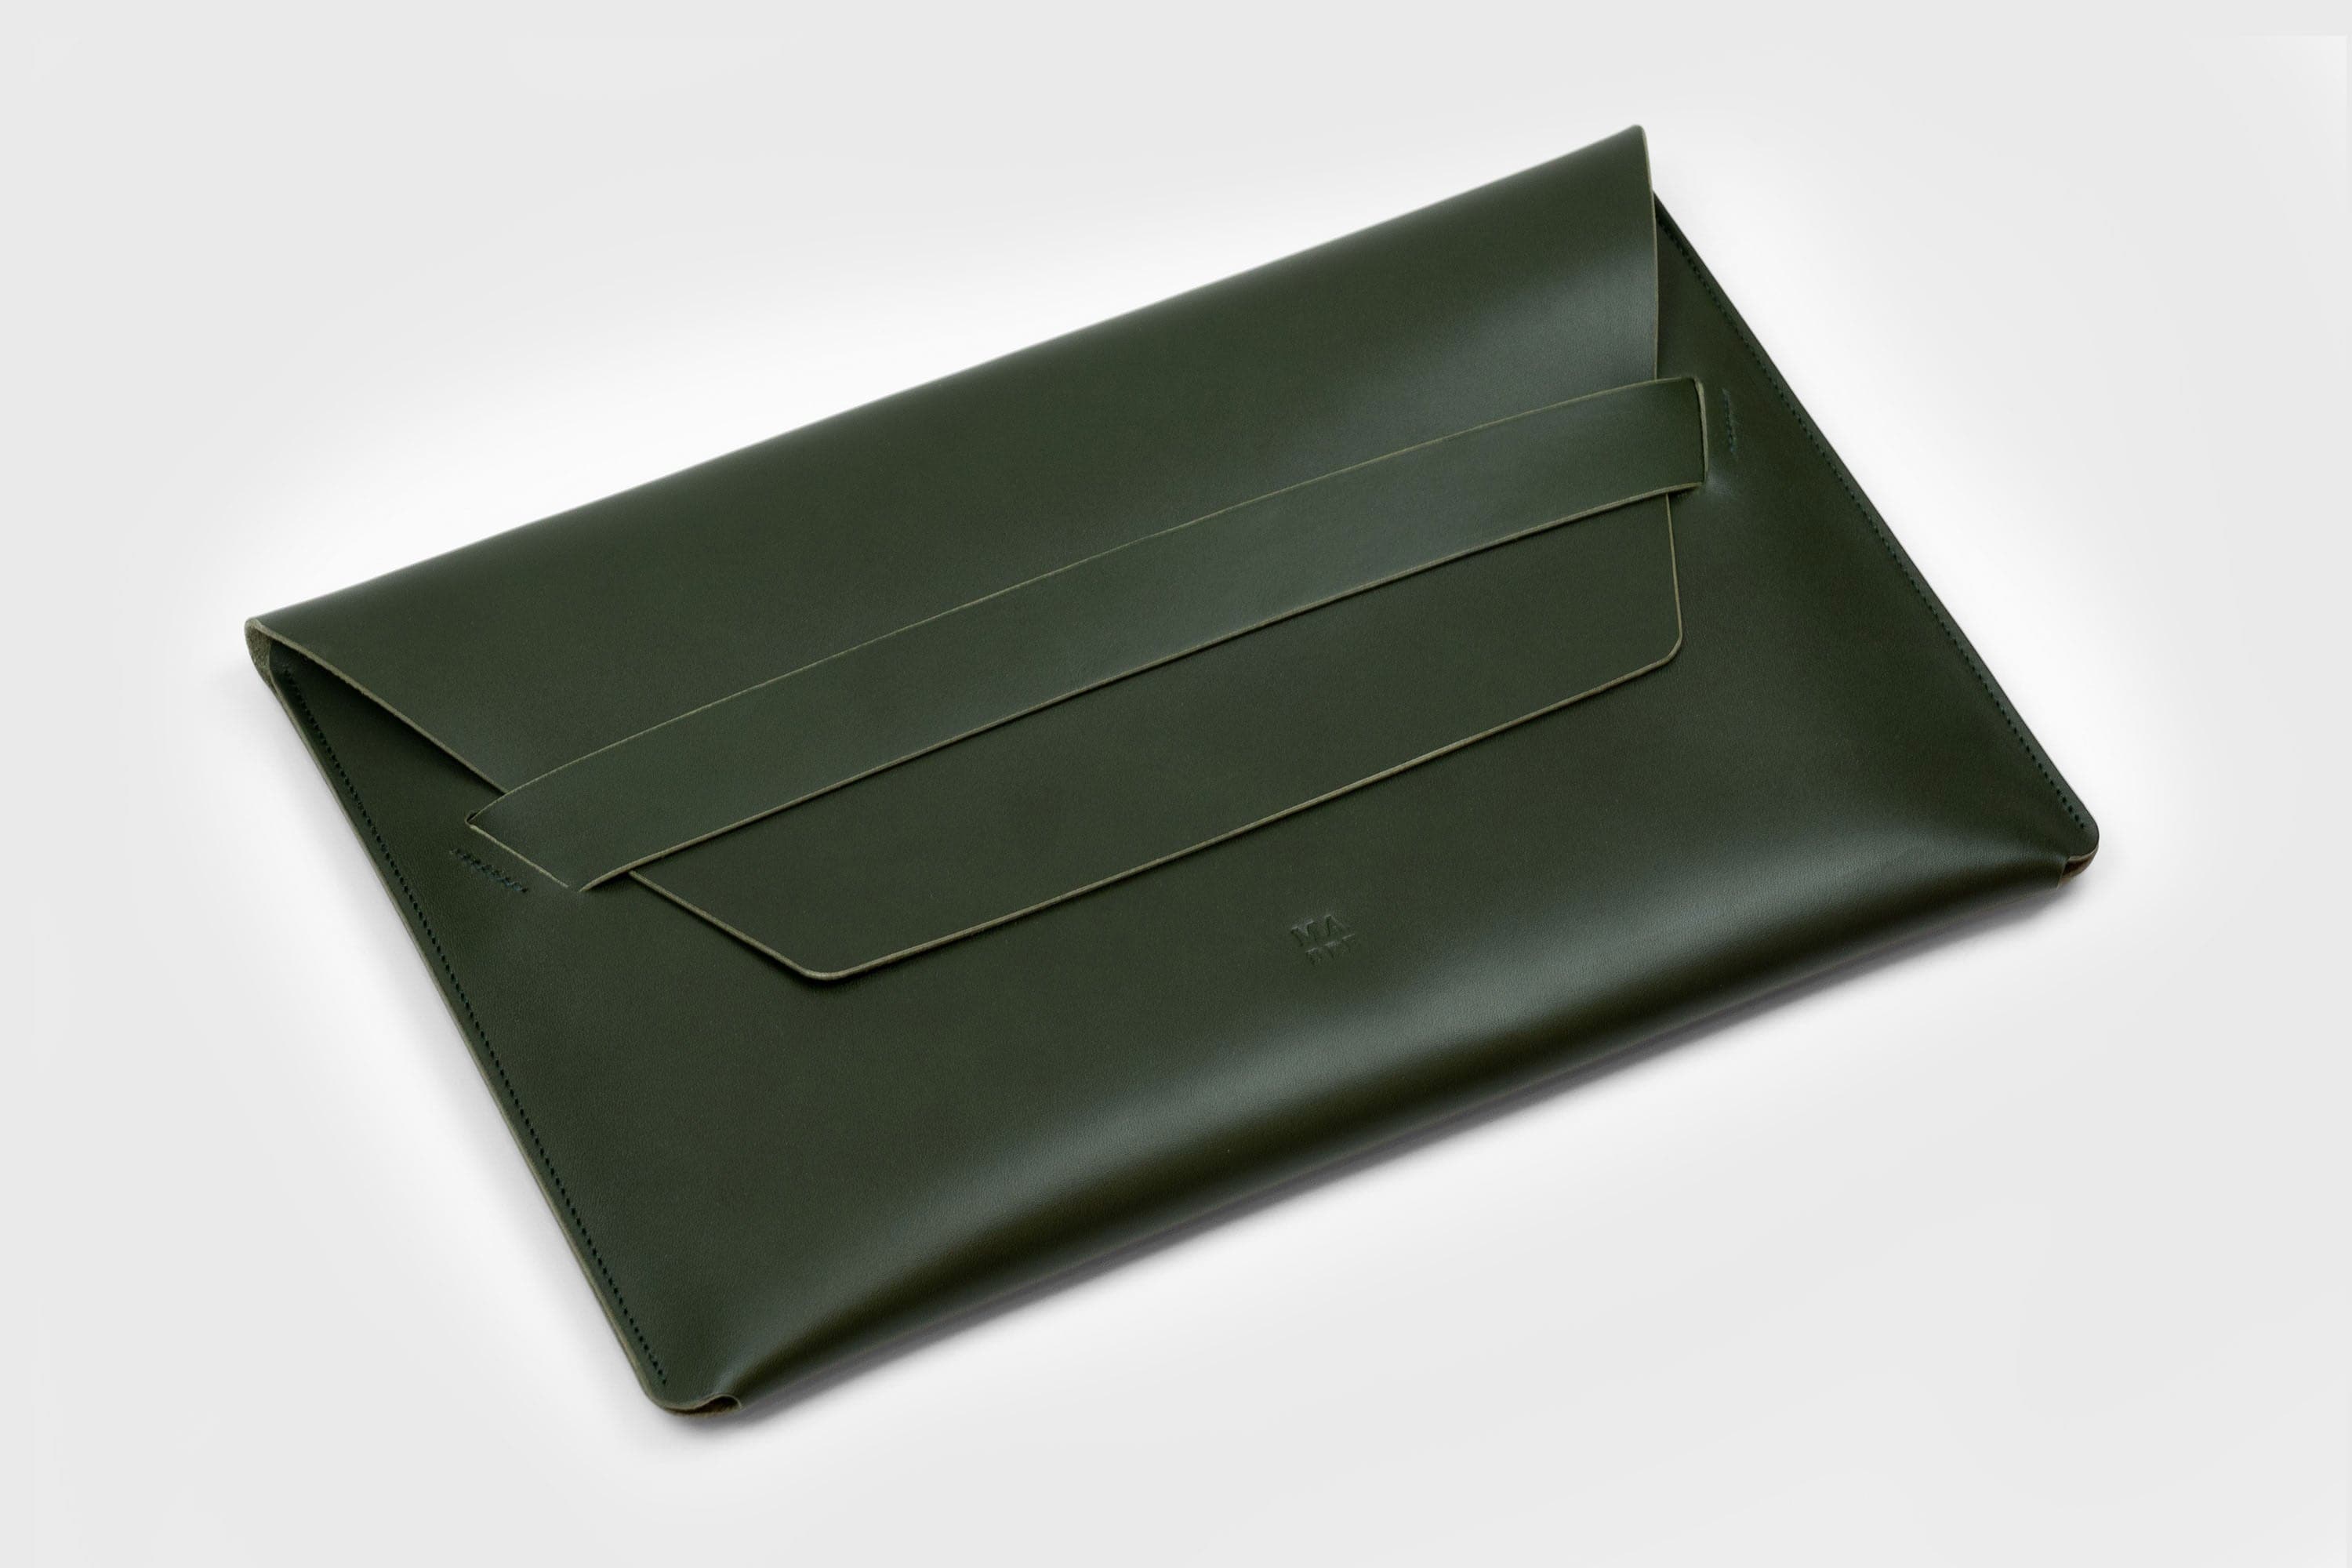 MacBook Sleeve 16 Inch Leather Dark Olive Green Vegetable Tanned Leather Exclusive Quality Premium Design By Manuel Dreesmann Atelier Madre Barcelona Spain